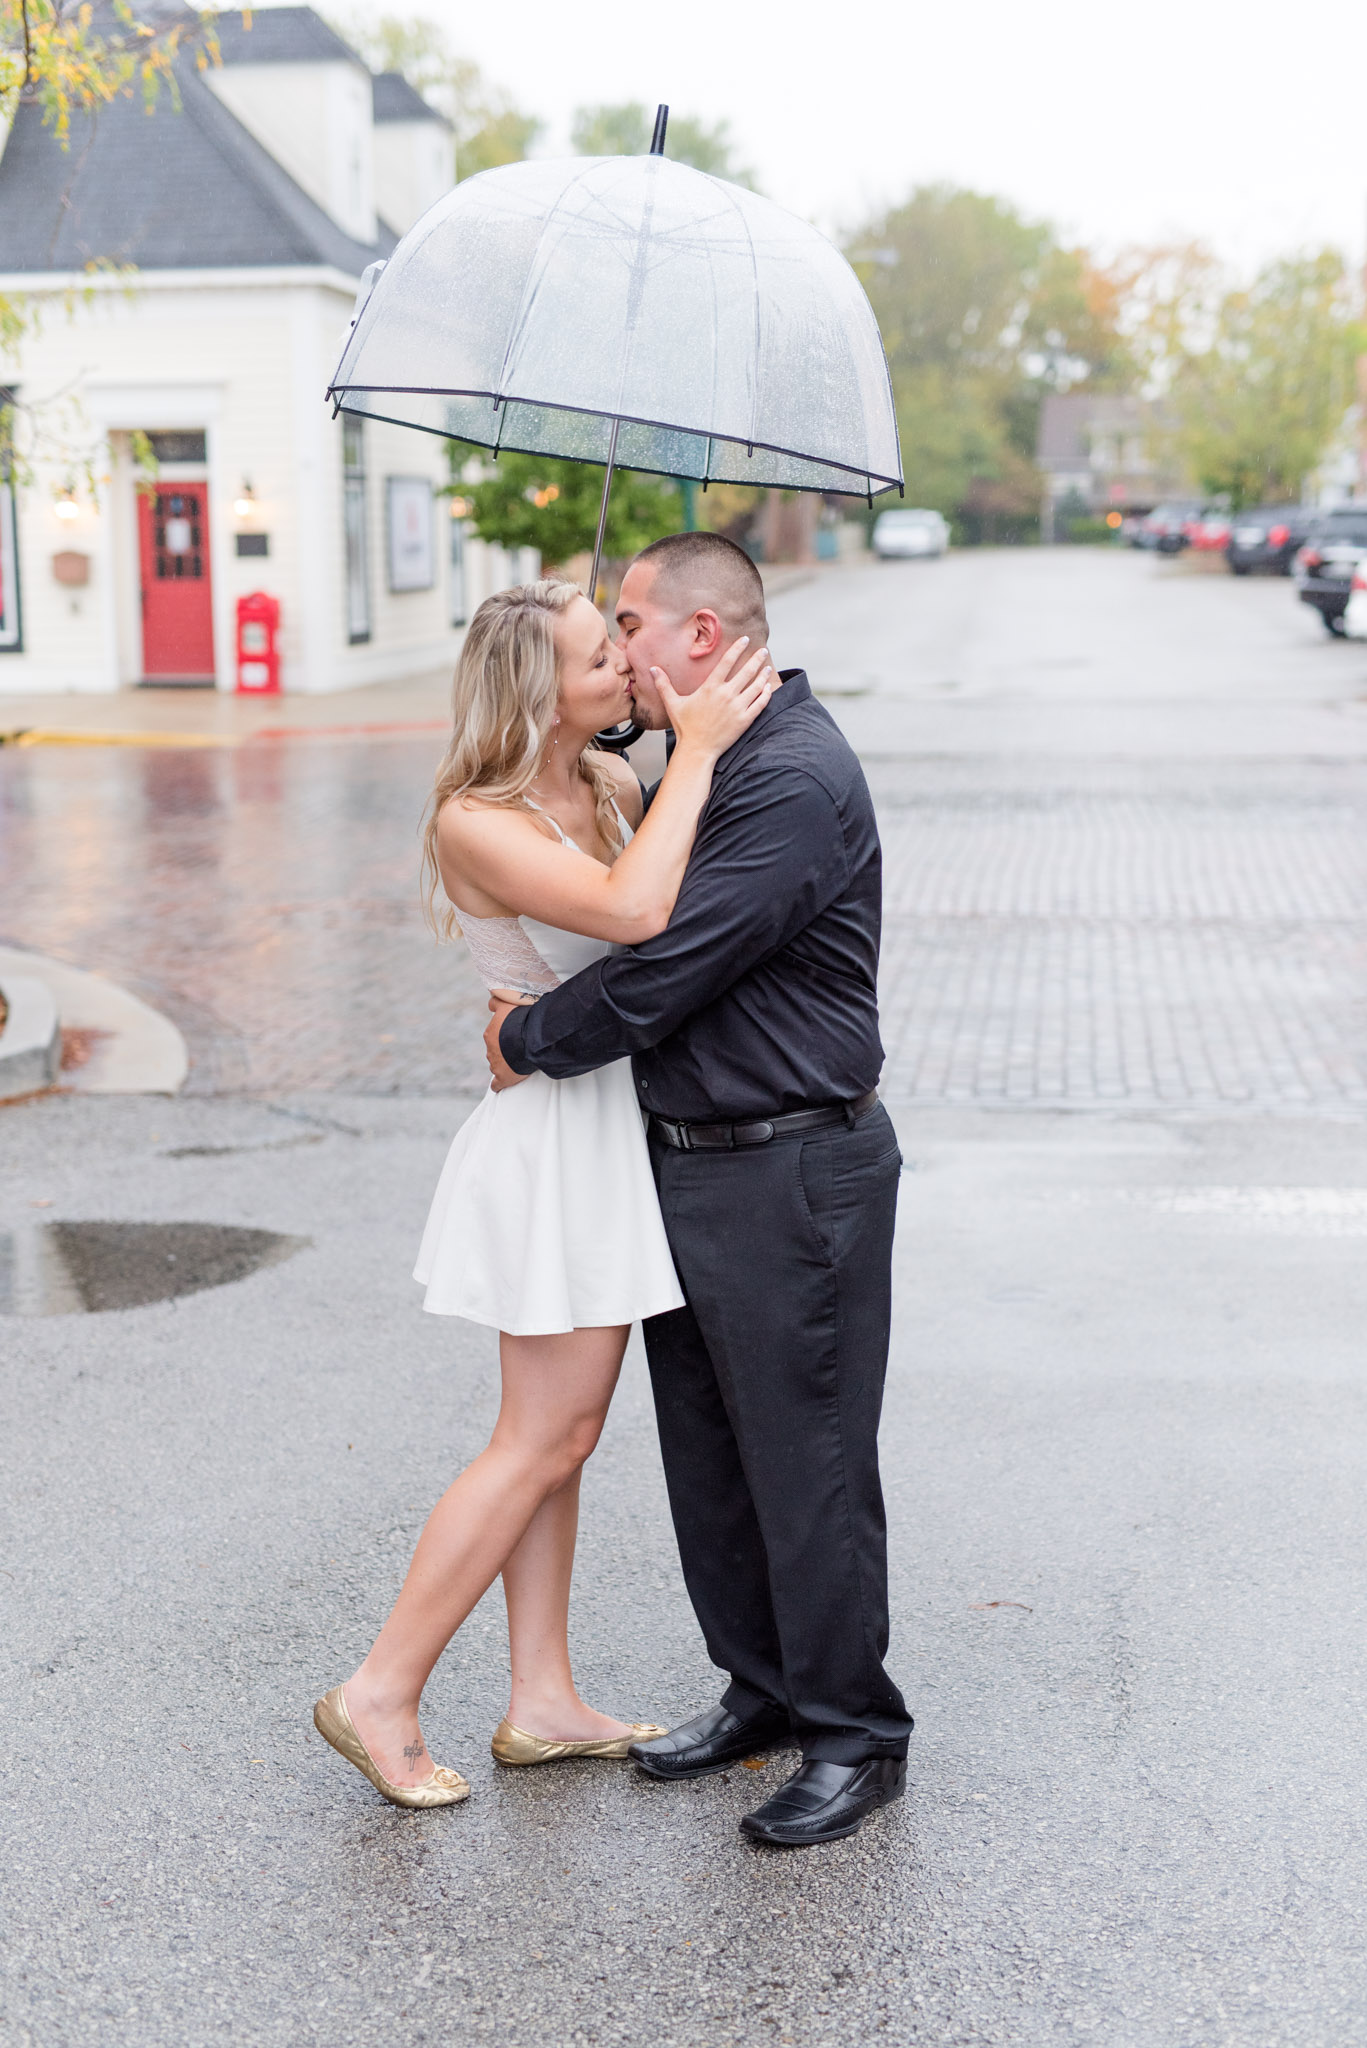 Bride and groom kiss under umbrella on downtown street.